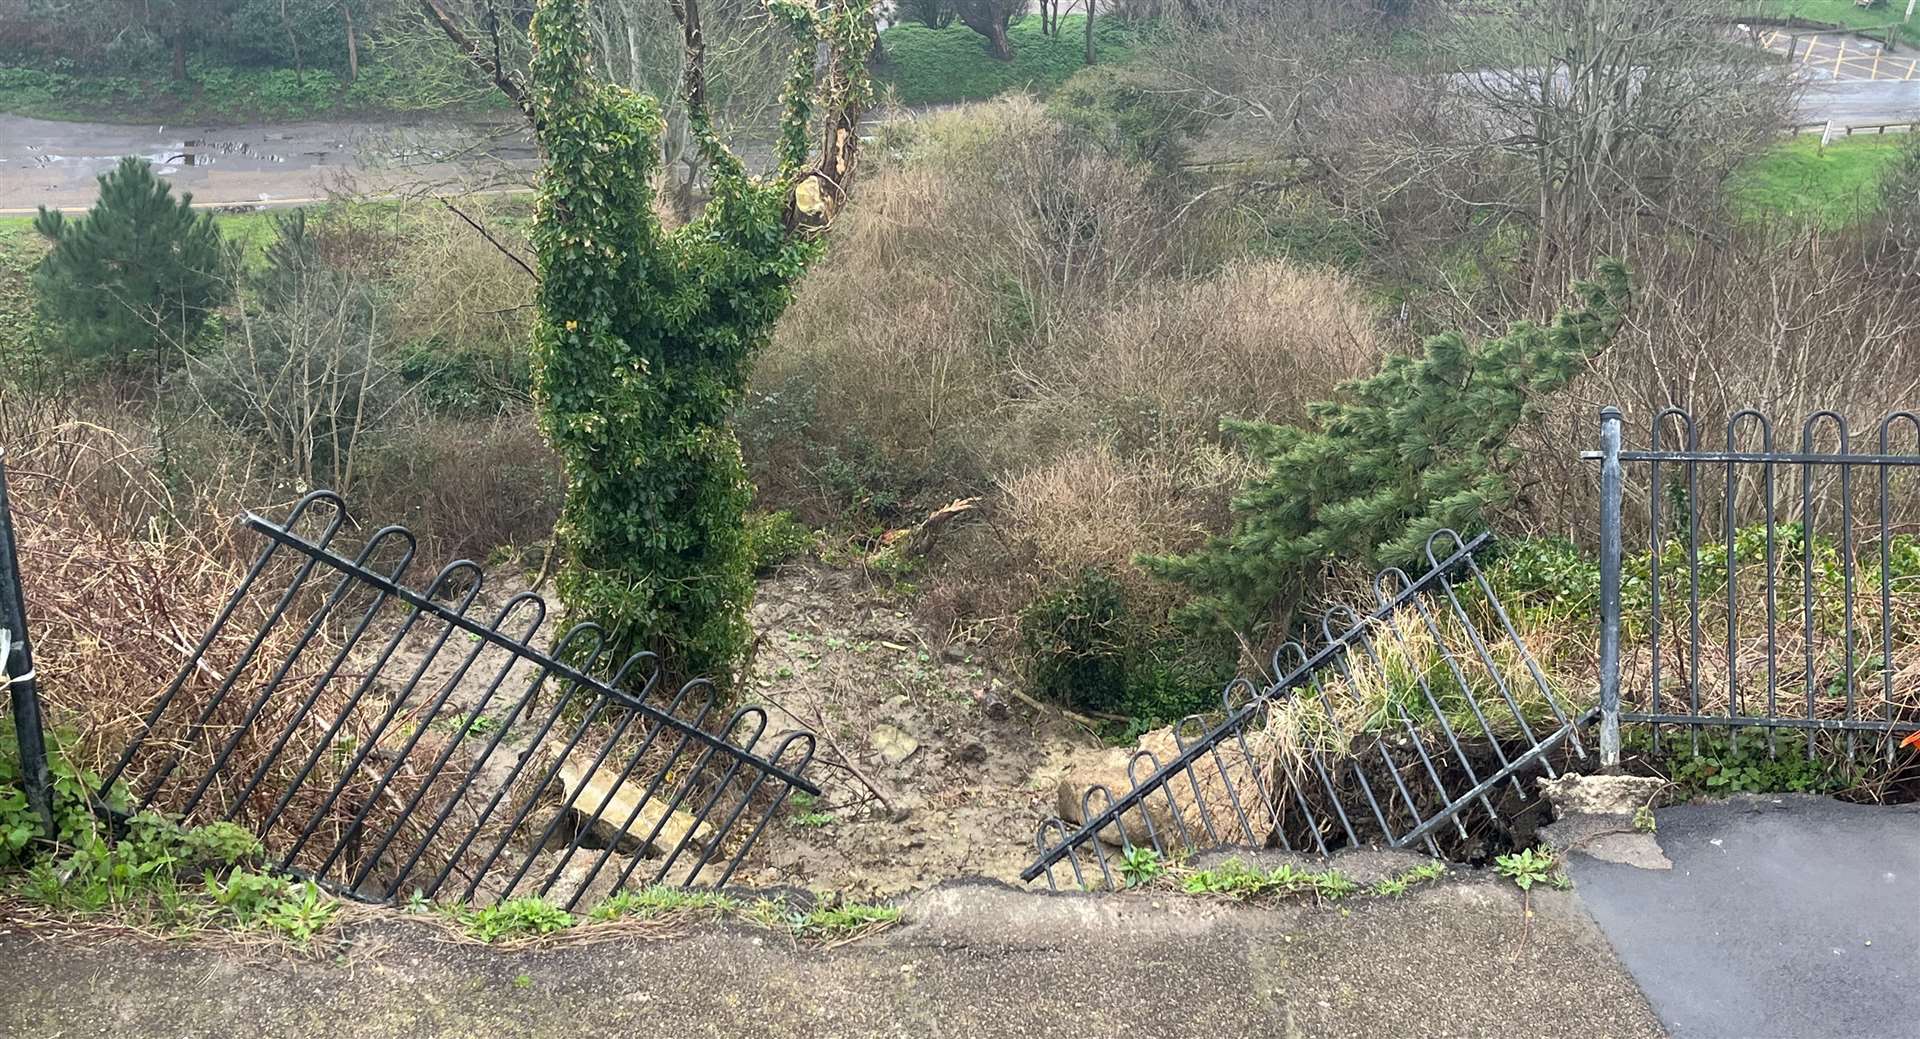 The previous closure on Madeira Walk remains in place, following a landslide that damaged part of the railings